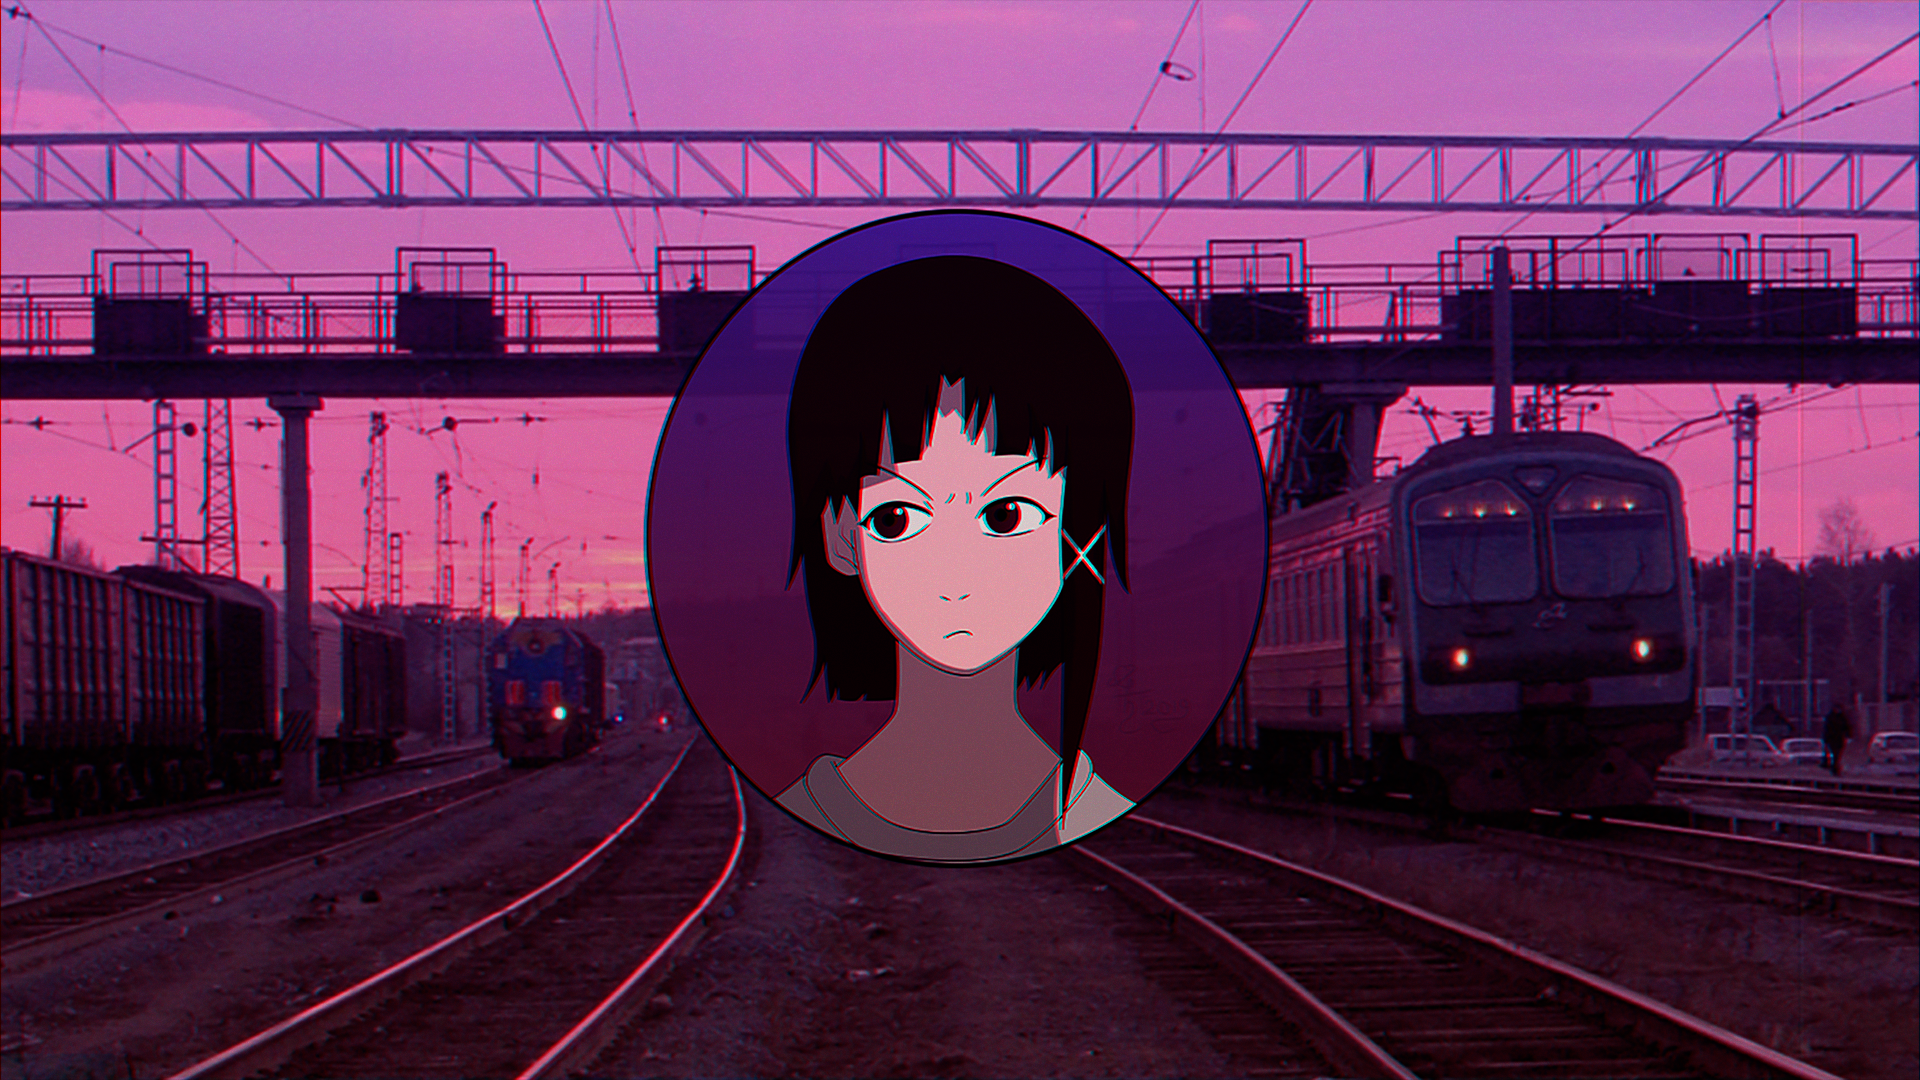 Anime 1920x1080 anime Lain Iwakura train Russia Serial Experiments Lain picture-in-picture